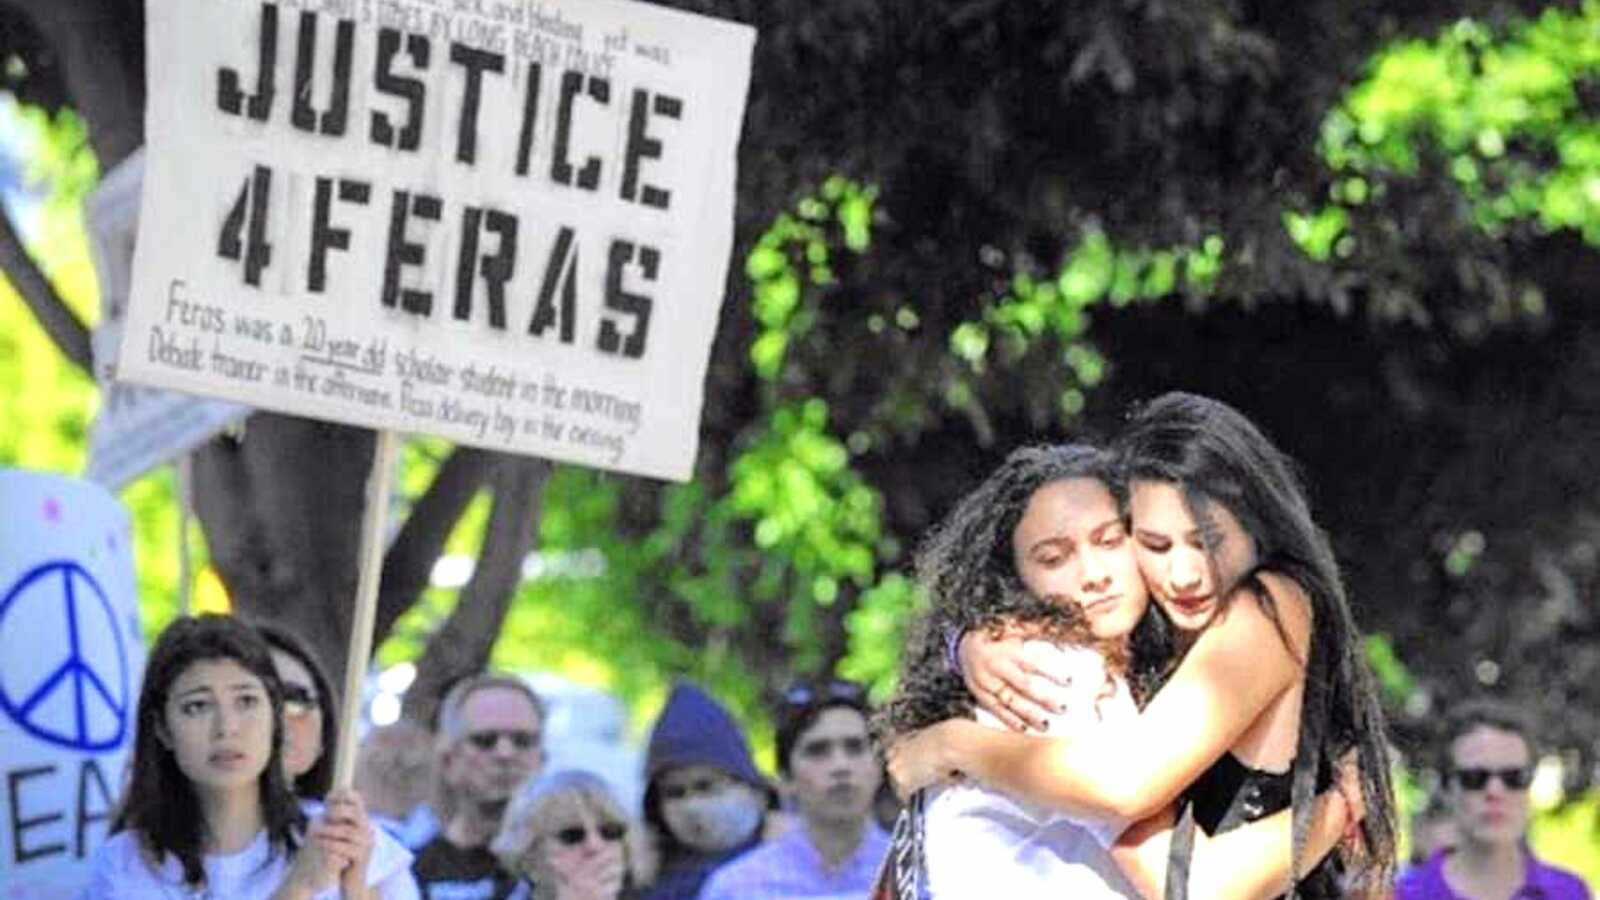 Two women hug at a rally for social justice